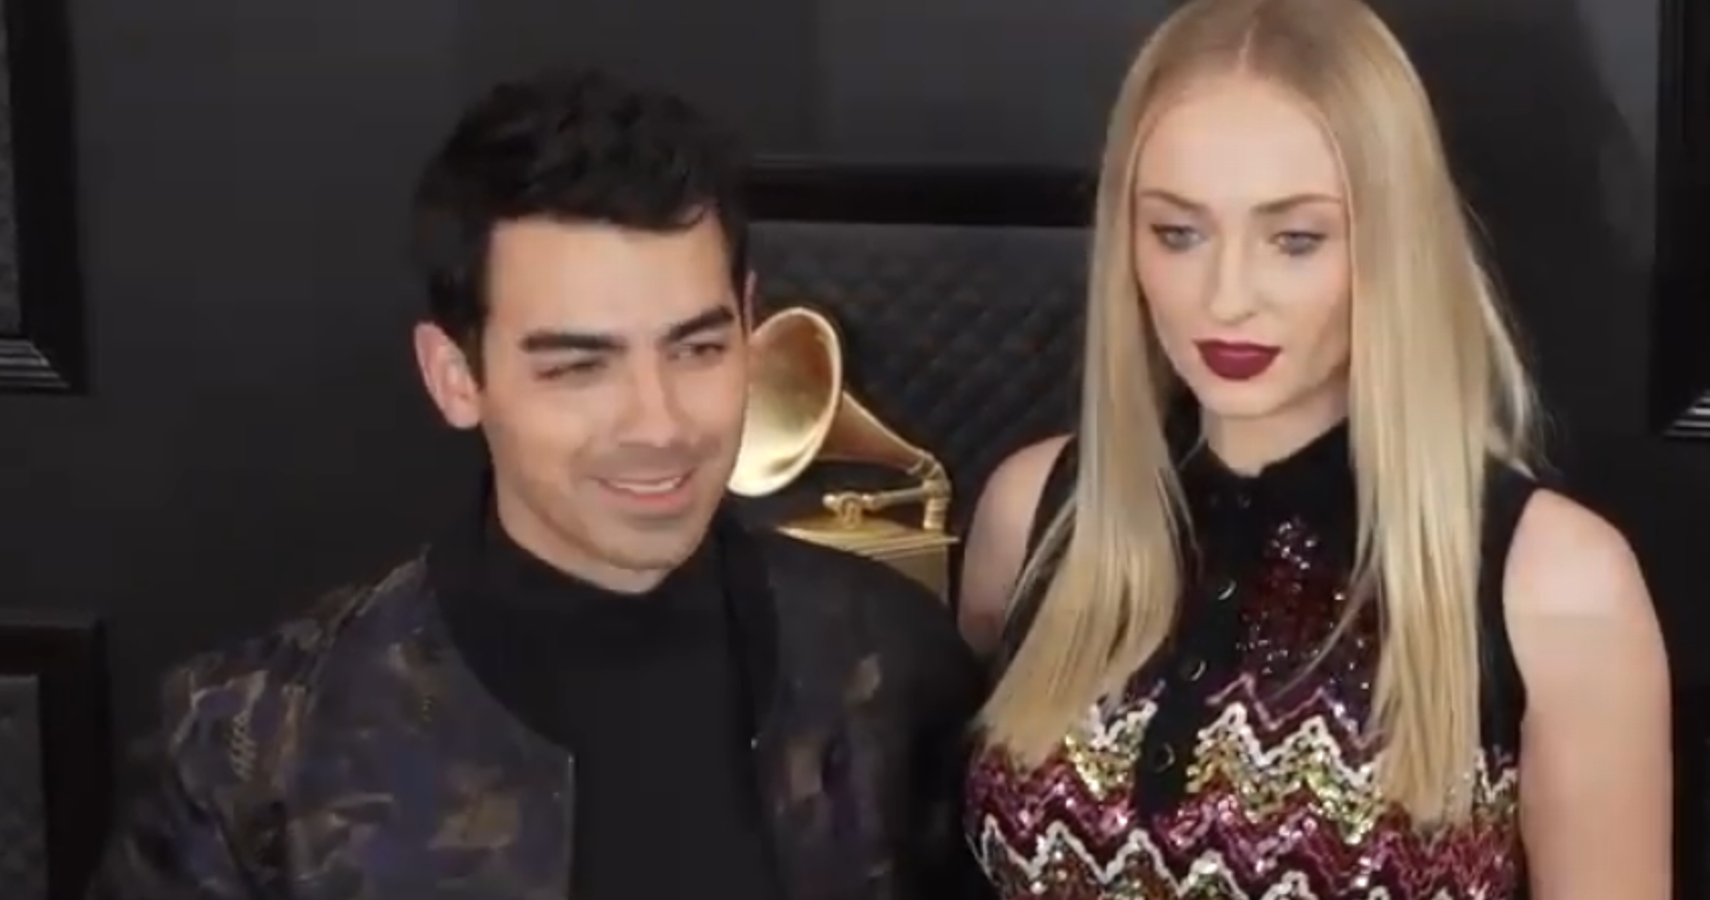 Sophie Turner Shows Off Baby Bump When Out With Hubby, Joe Jonas